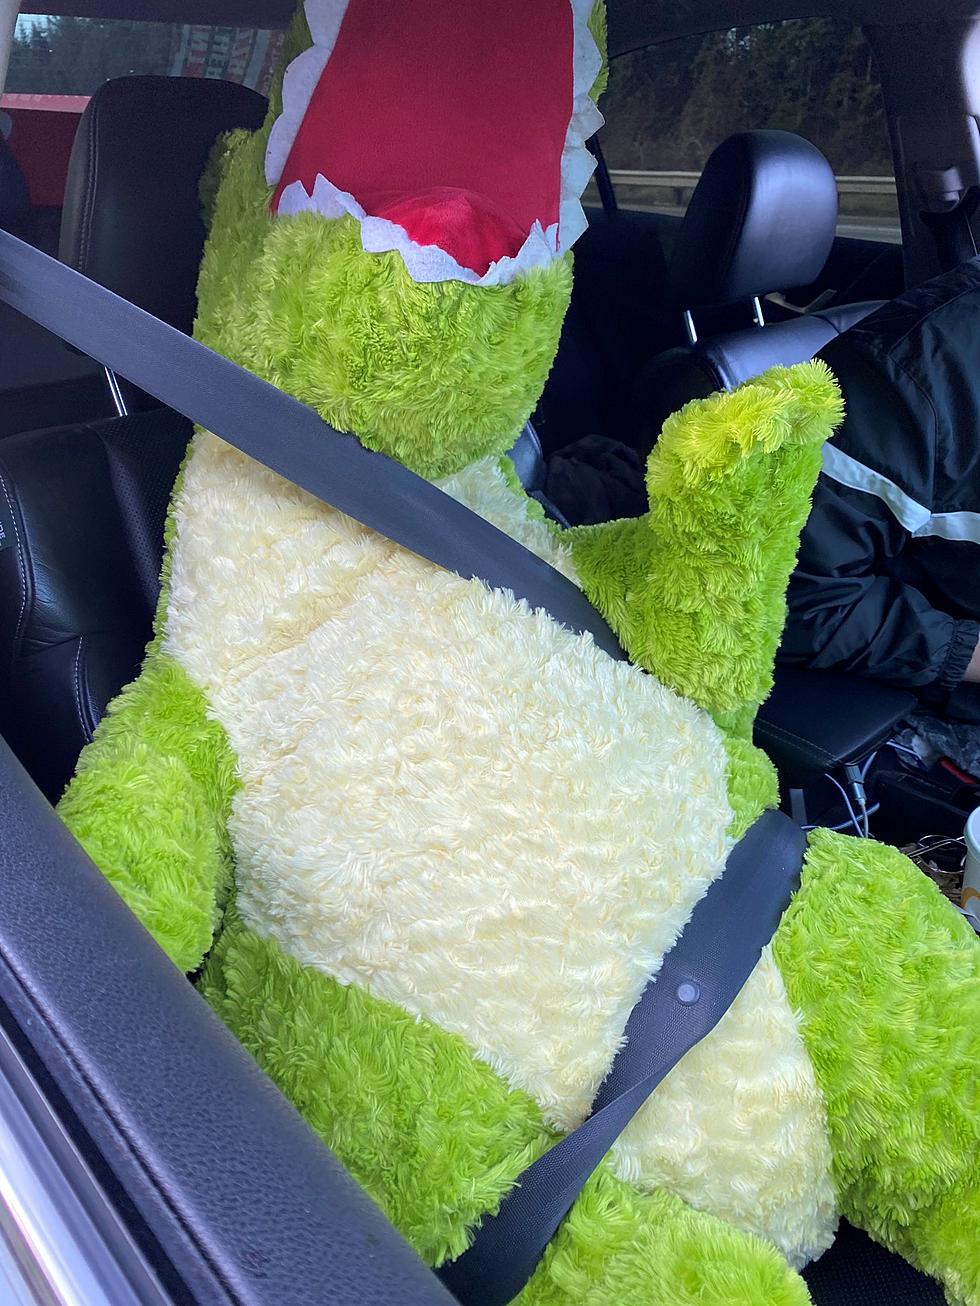 Man Busted Using Giant Stuffed Dino As Passenger in HOV Lane